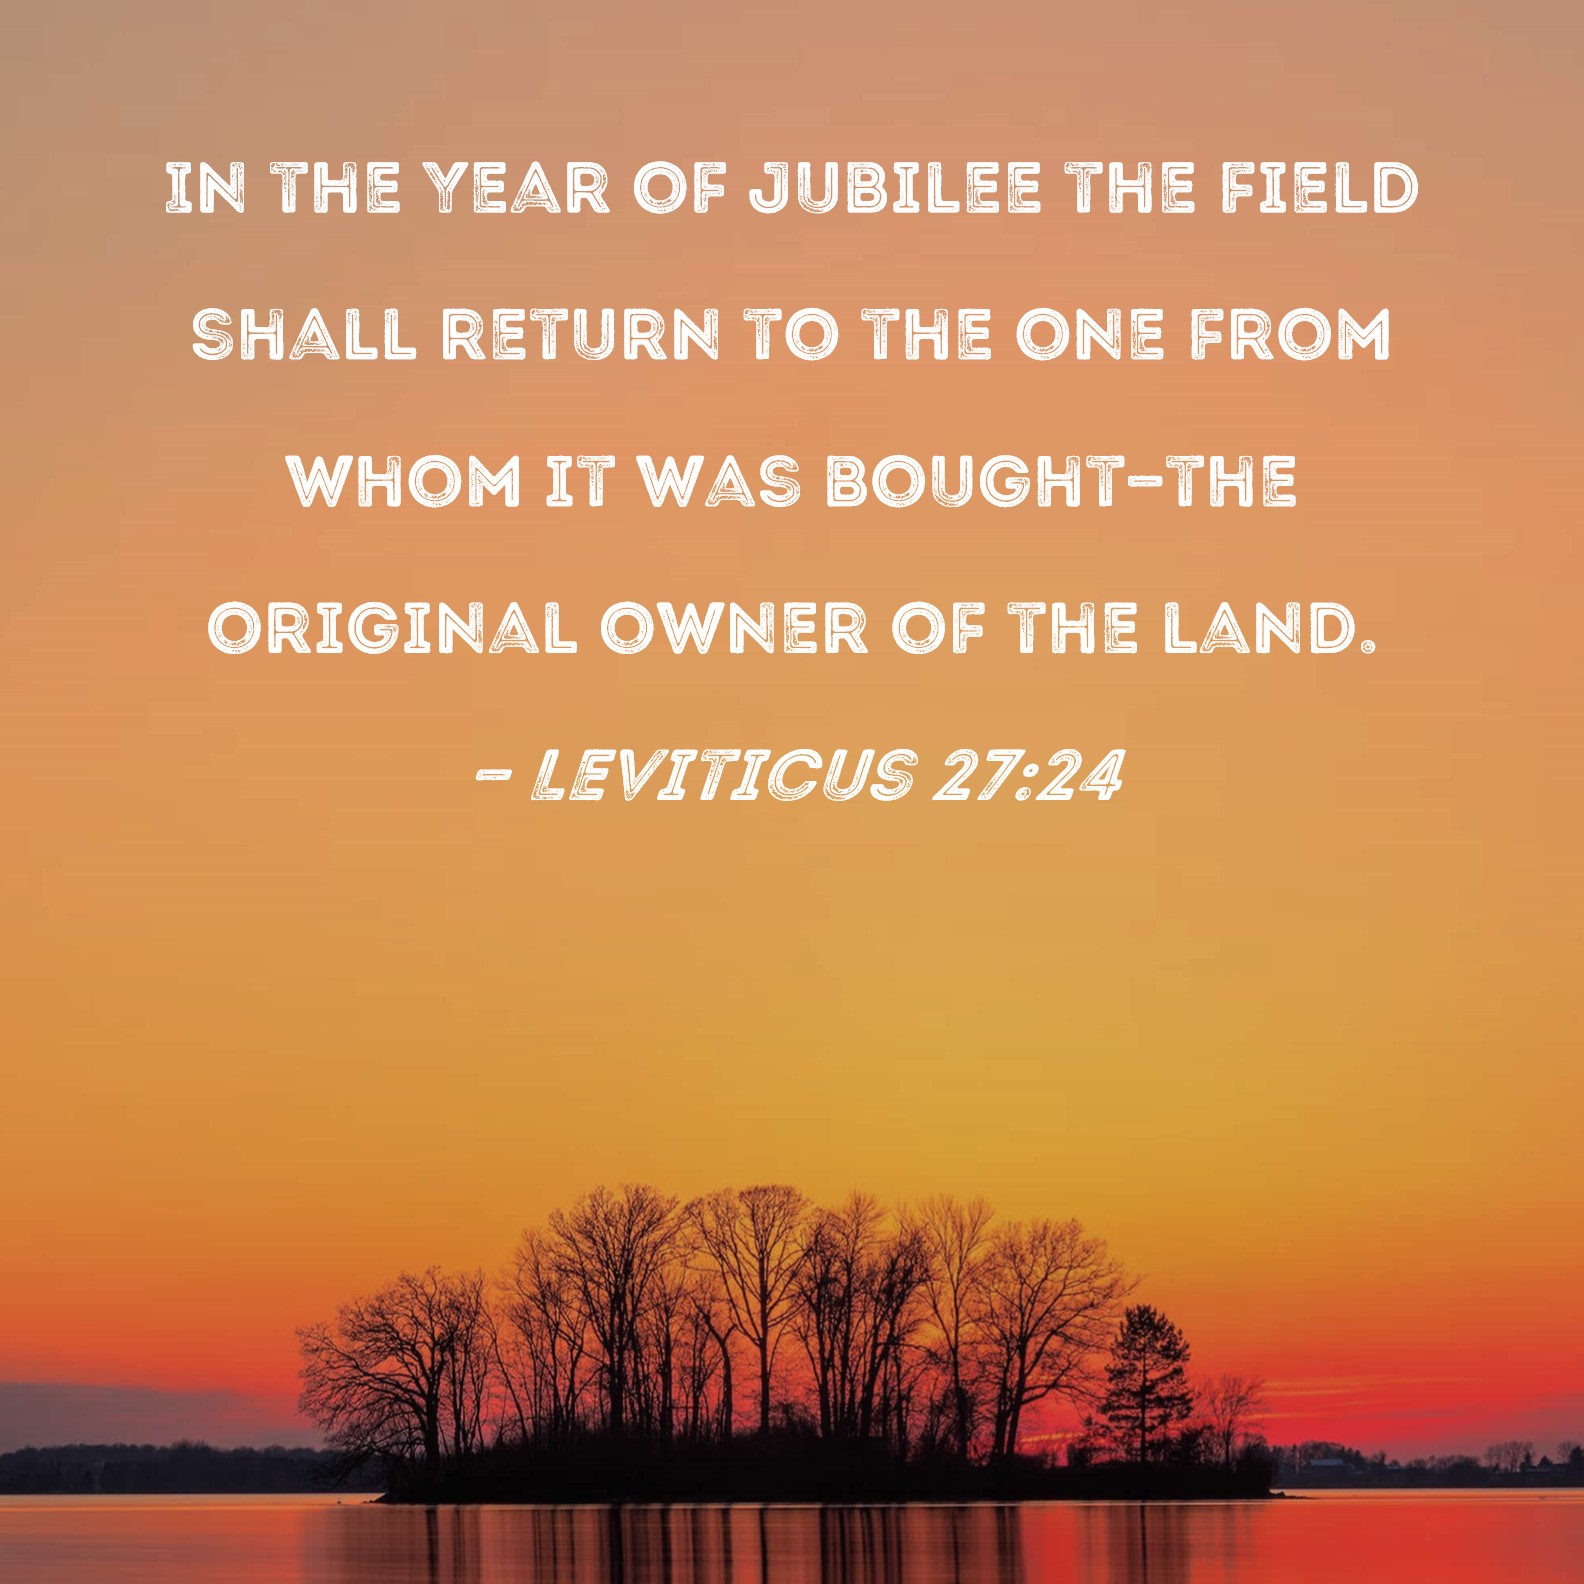 Leviticus 2724 In the Year of Jubilee the field shall return to the